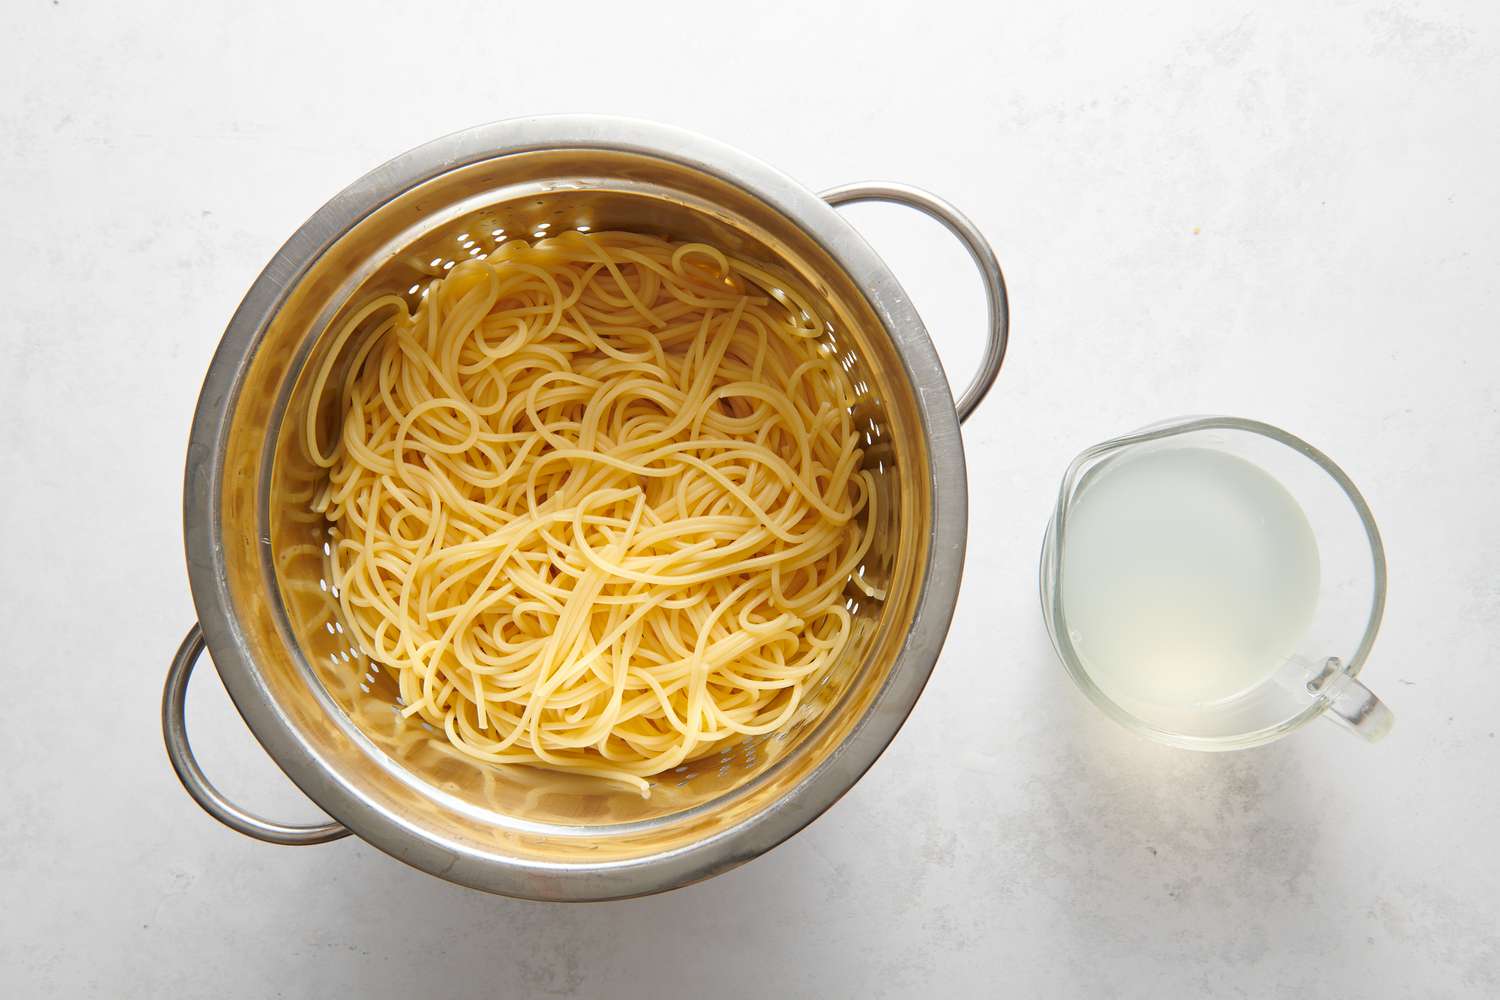 A colander of cooked spaghetti next to a measuring cup of pasta water